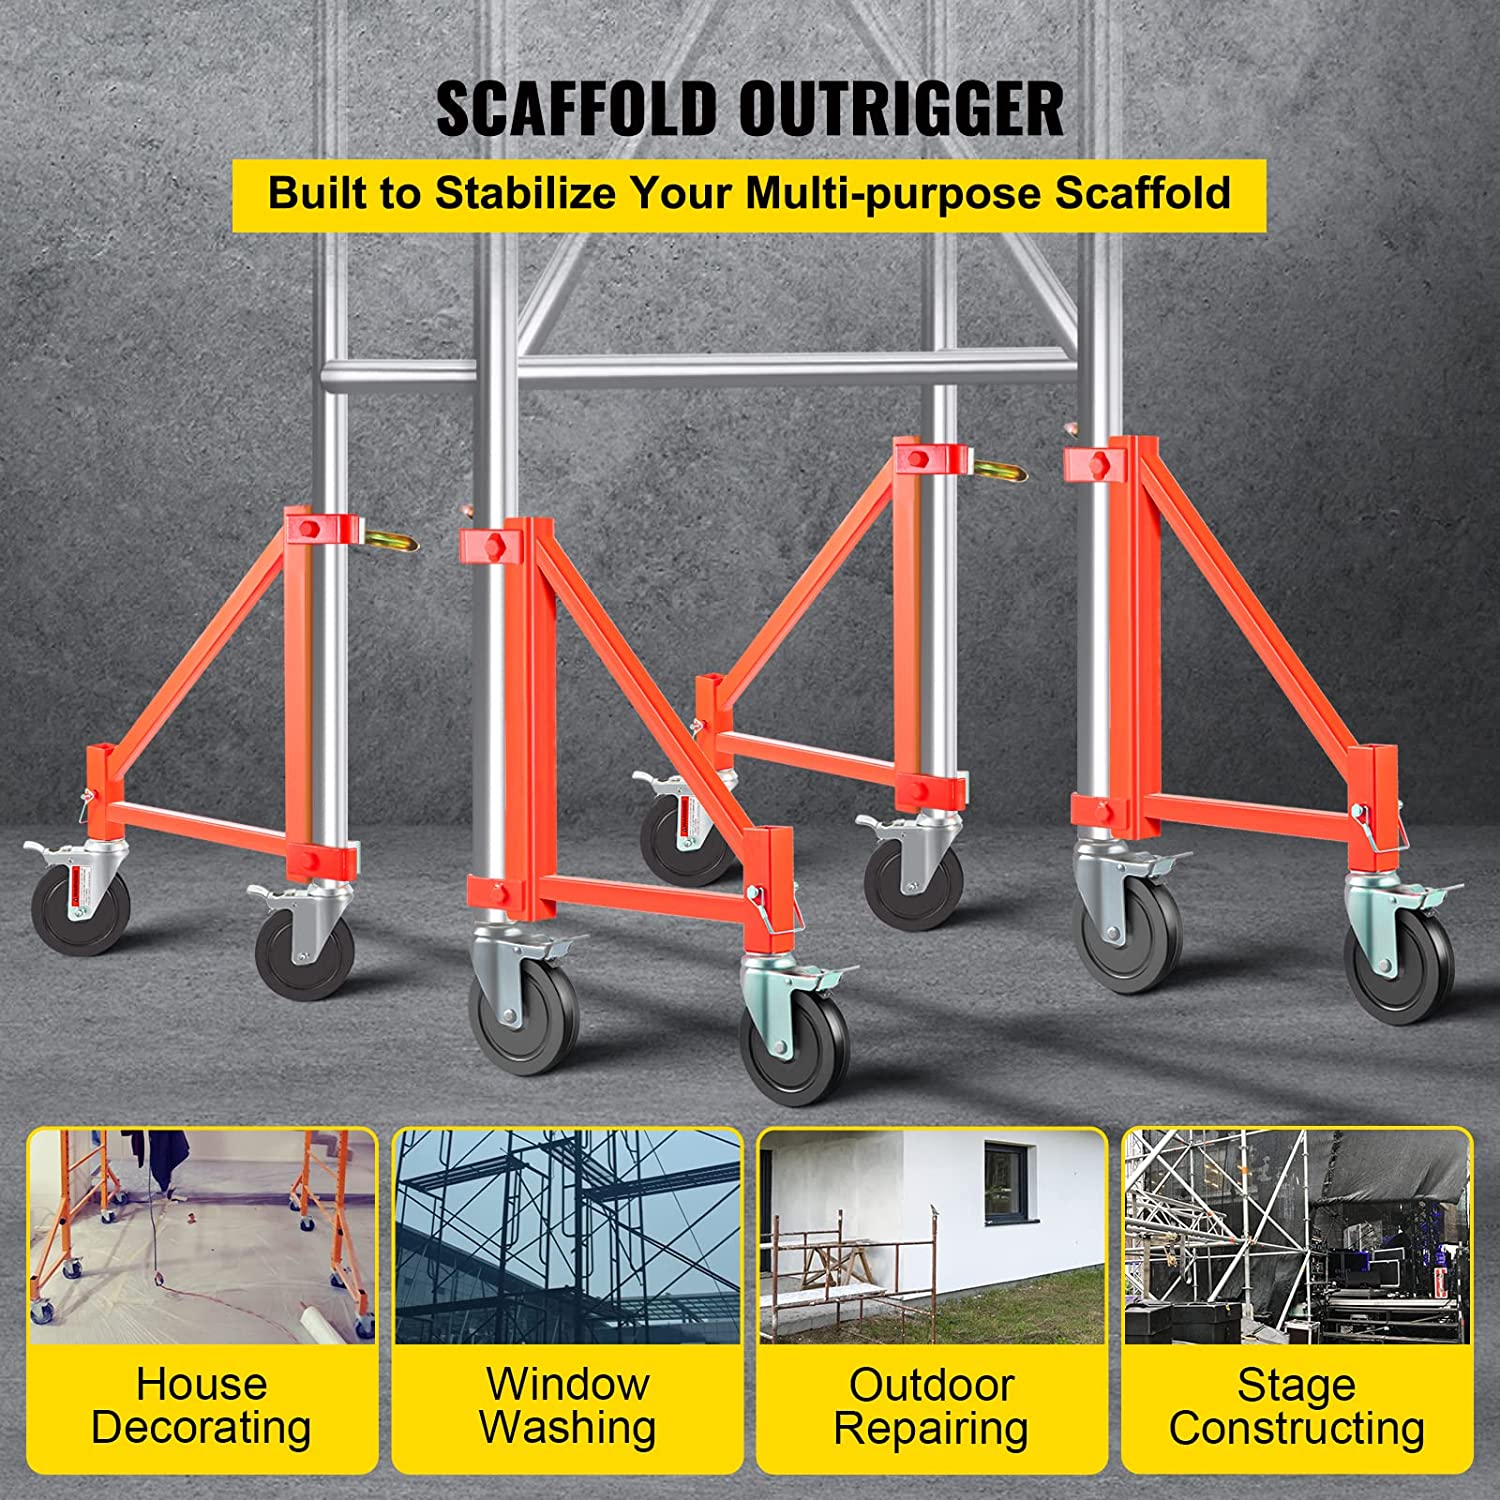 VEVOR Scaffold Outrigger, 18″ x 18″ x 24″ Scaffolding Outriggers, 4 Pieces Outriggers for Scaffolding, Screw Type for Home Improvement Projects Like P